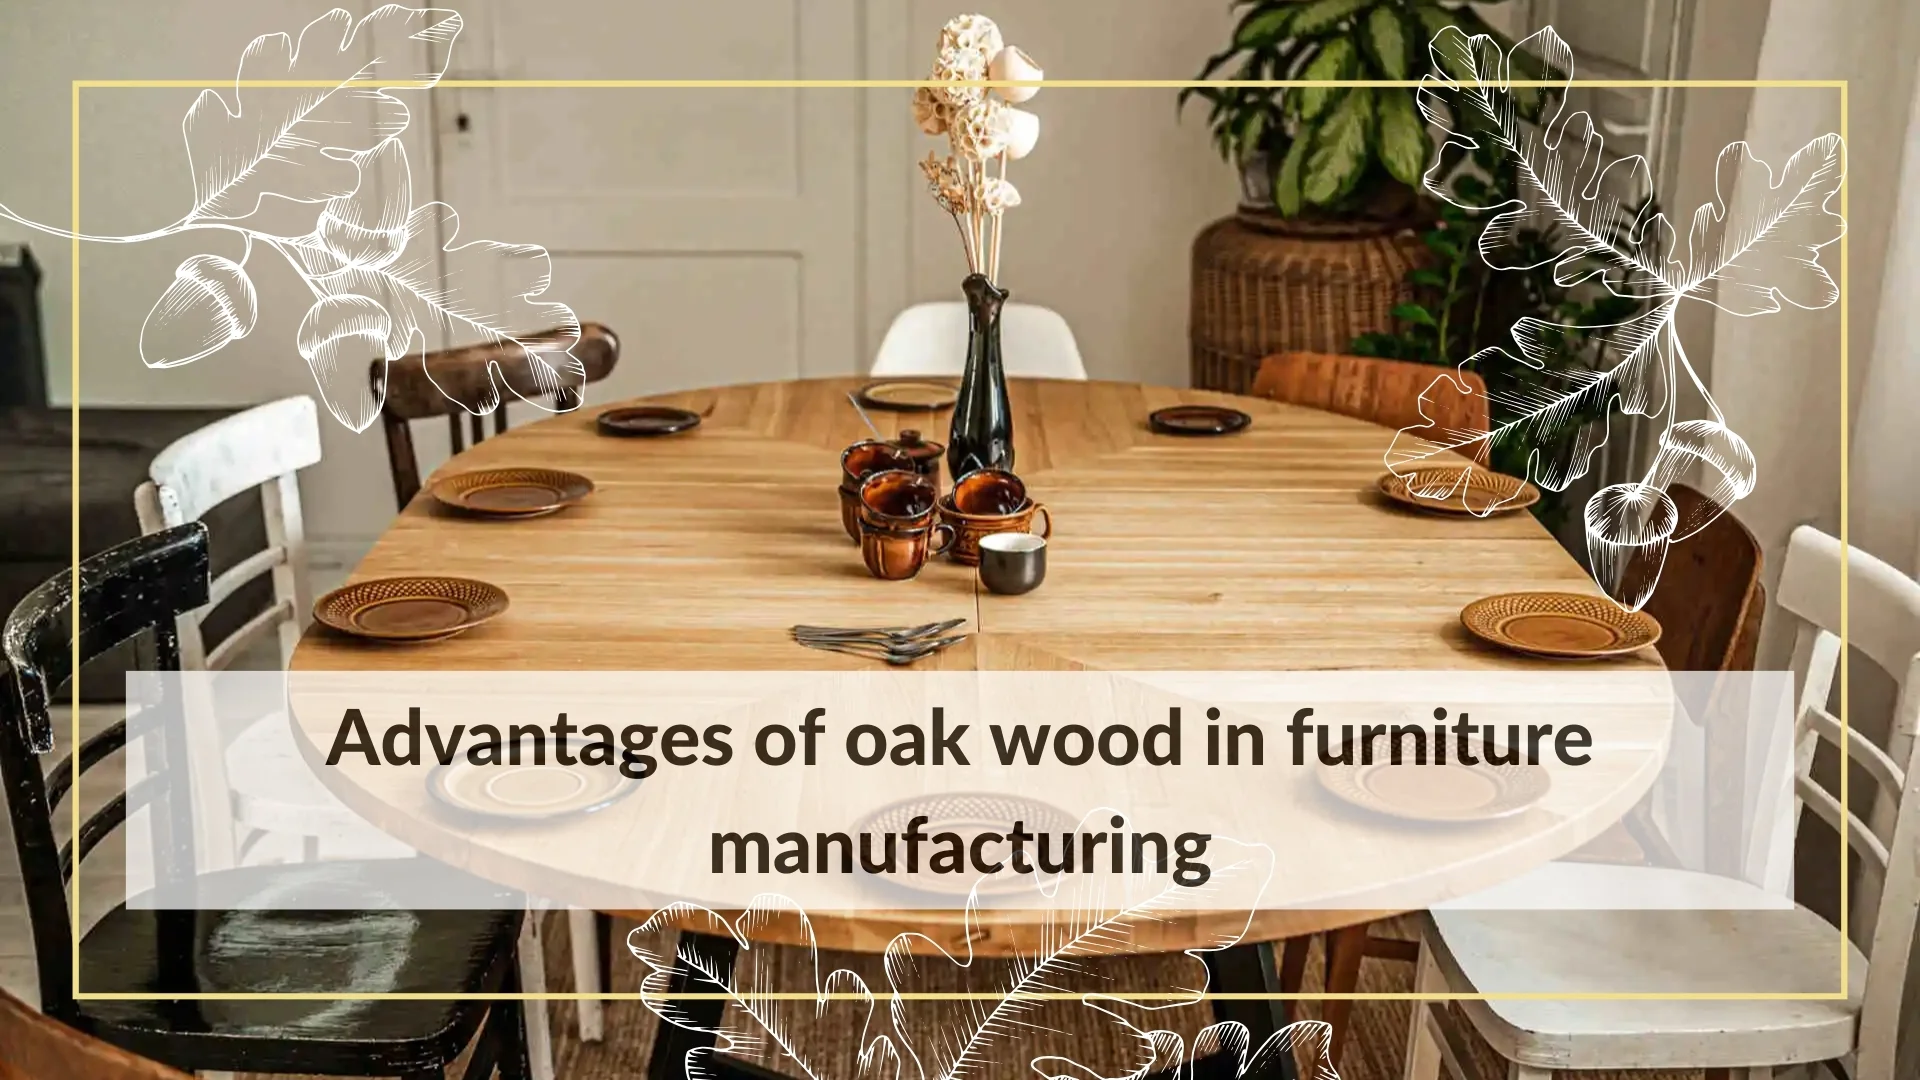 Advantages of oak wood furniture for Your Home